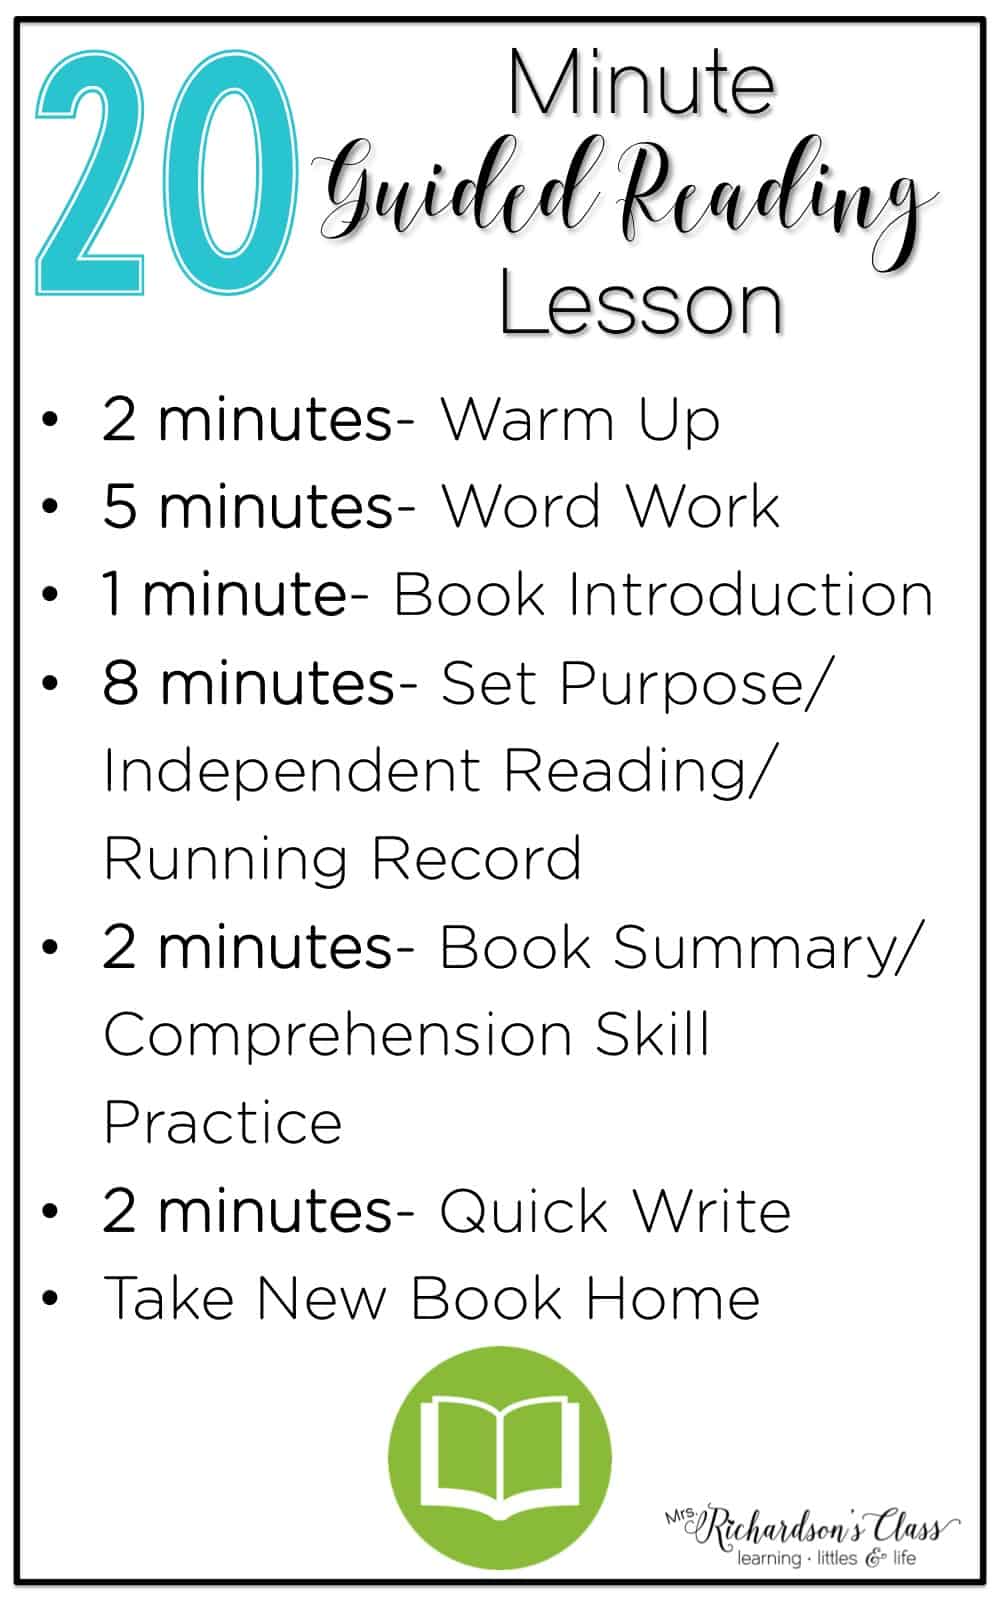 This guided reading schedule makes structuring a guided reading lesson easy to understand. Take each component step-by-step. 